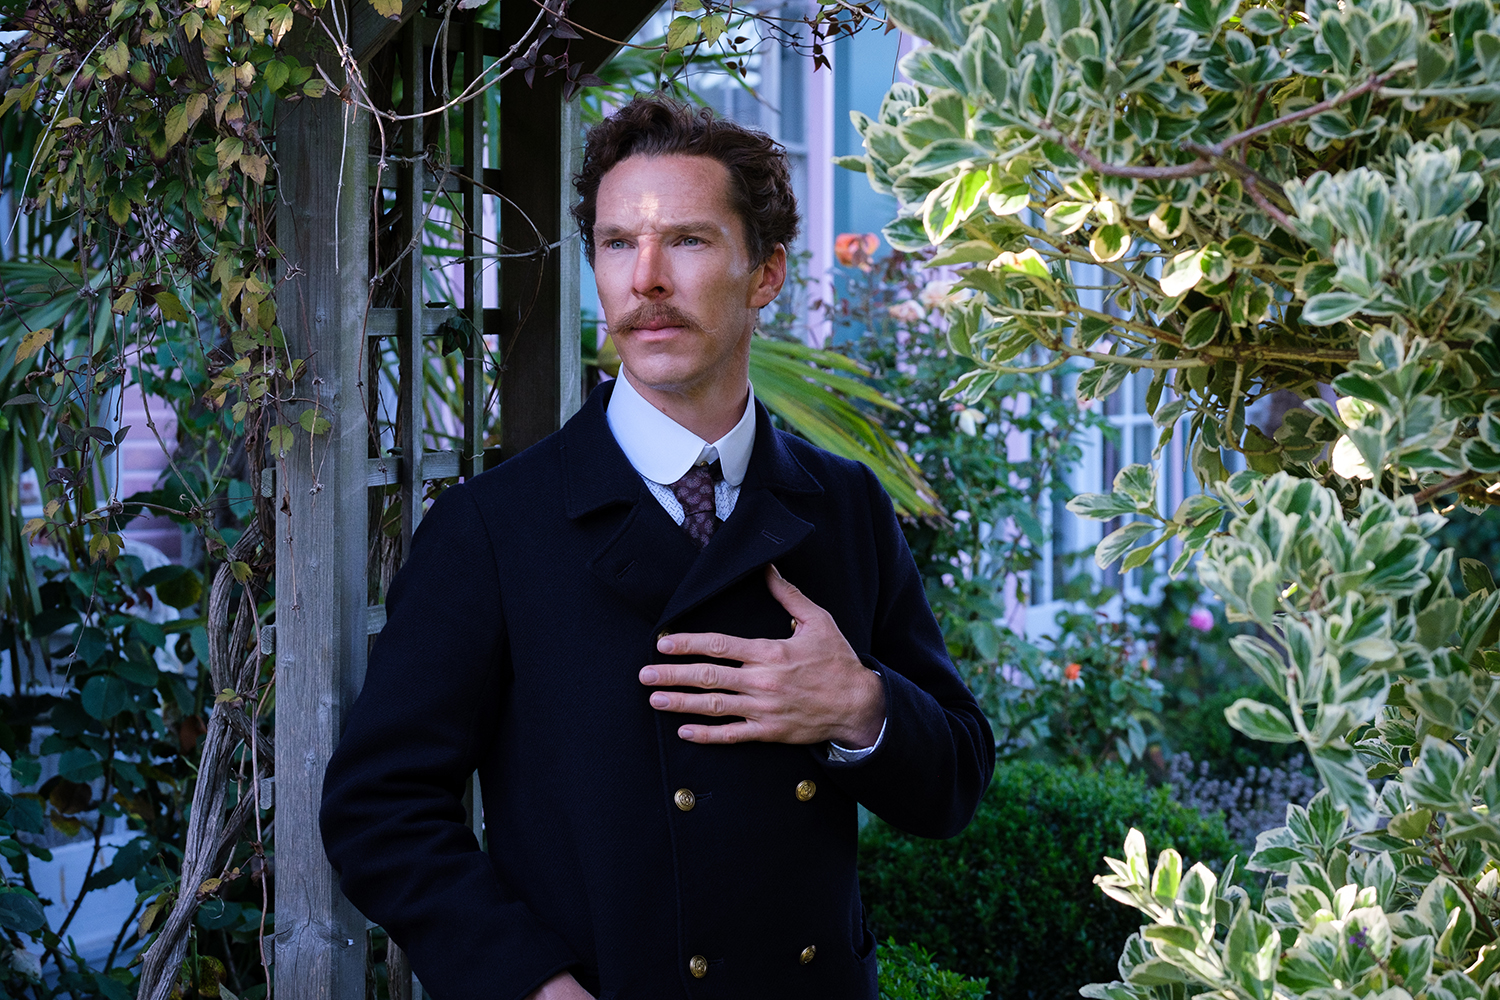 The Electrical Life of Louis Wain Cast - Benedict Cumberbatch as Louis Wain